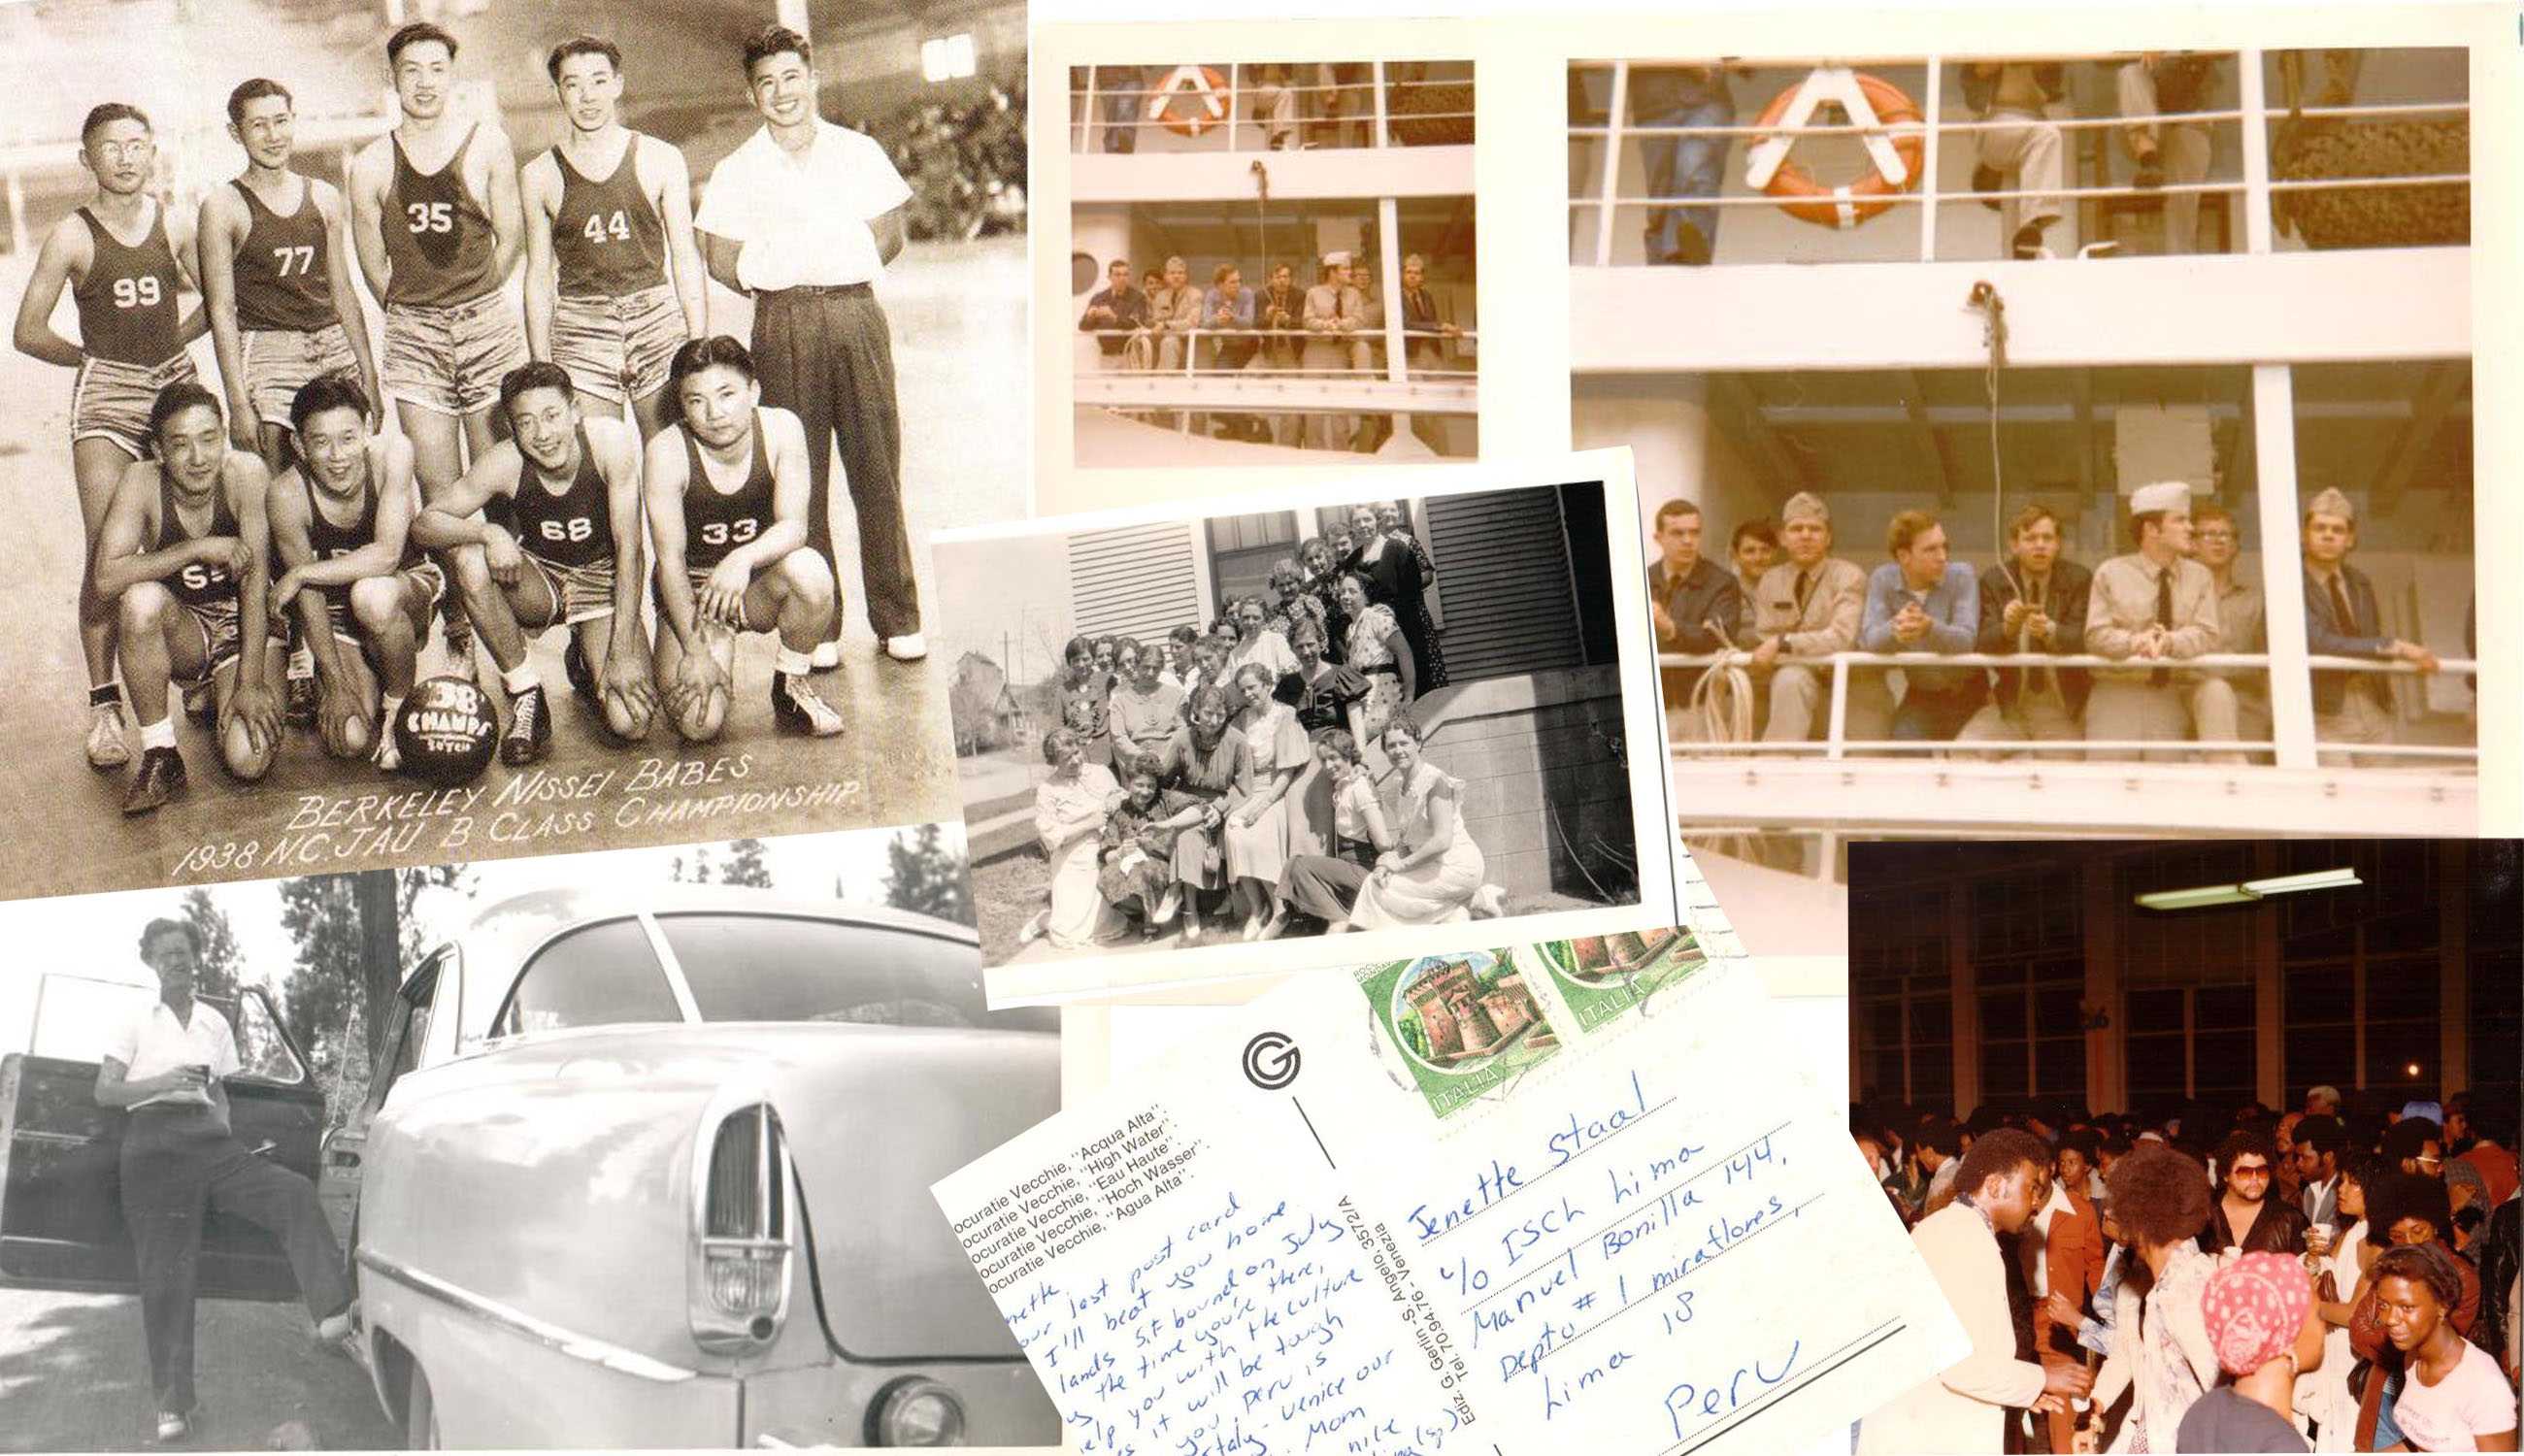 A collage composed of old photos and a postcard discovered at the Ashby Flea Market in Berkeley